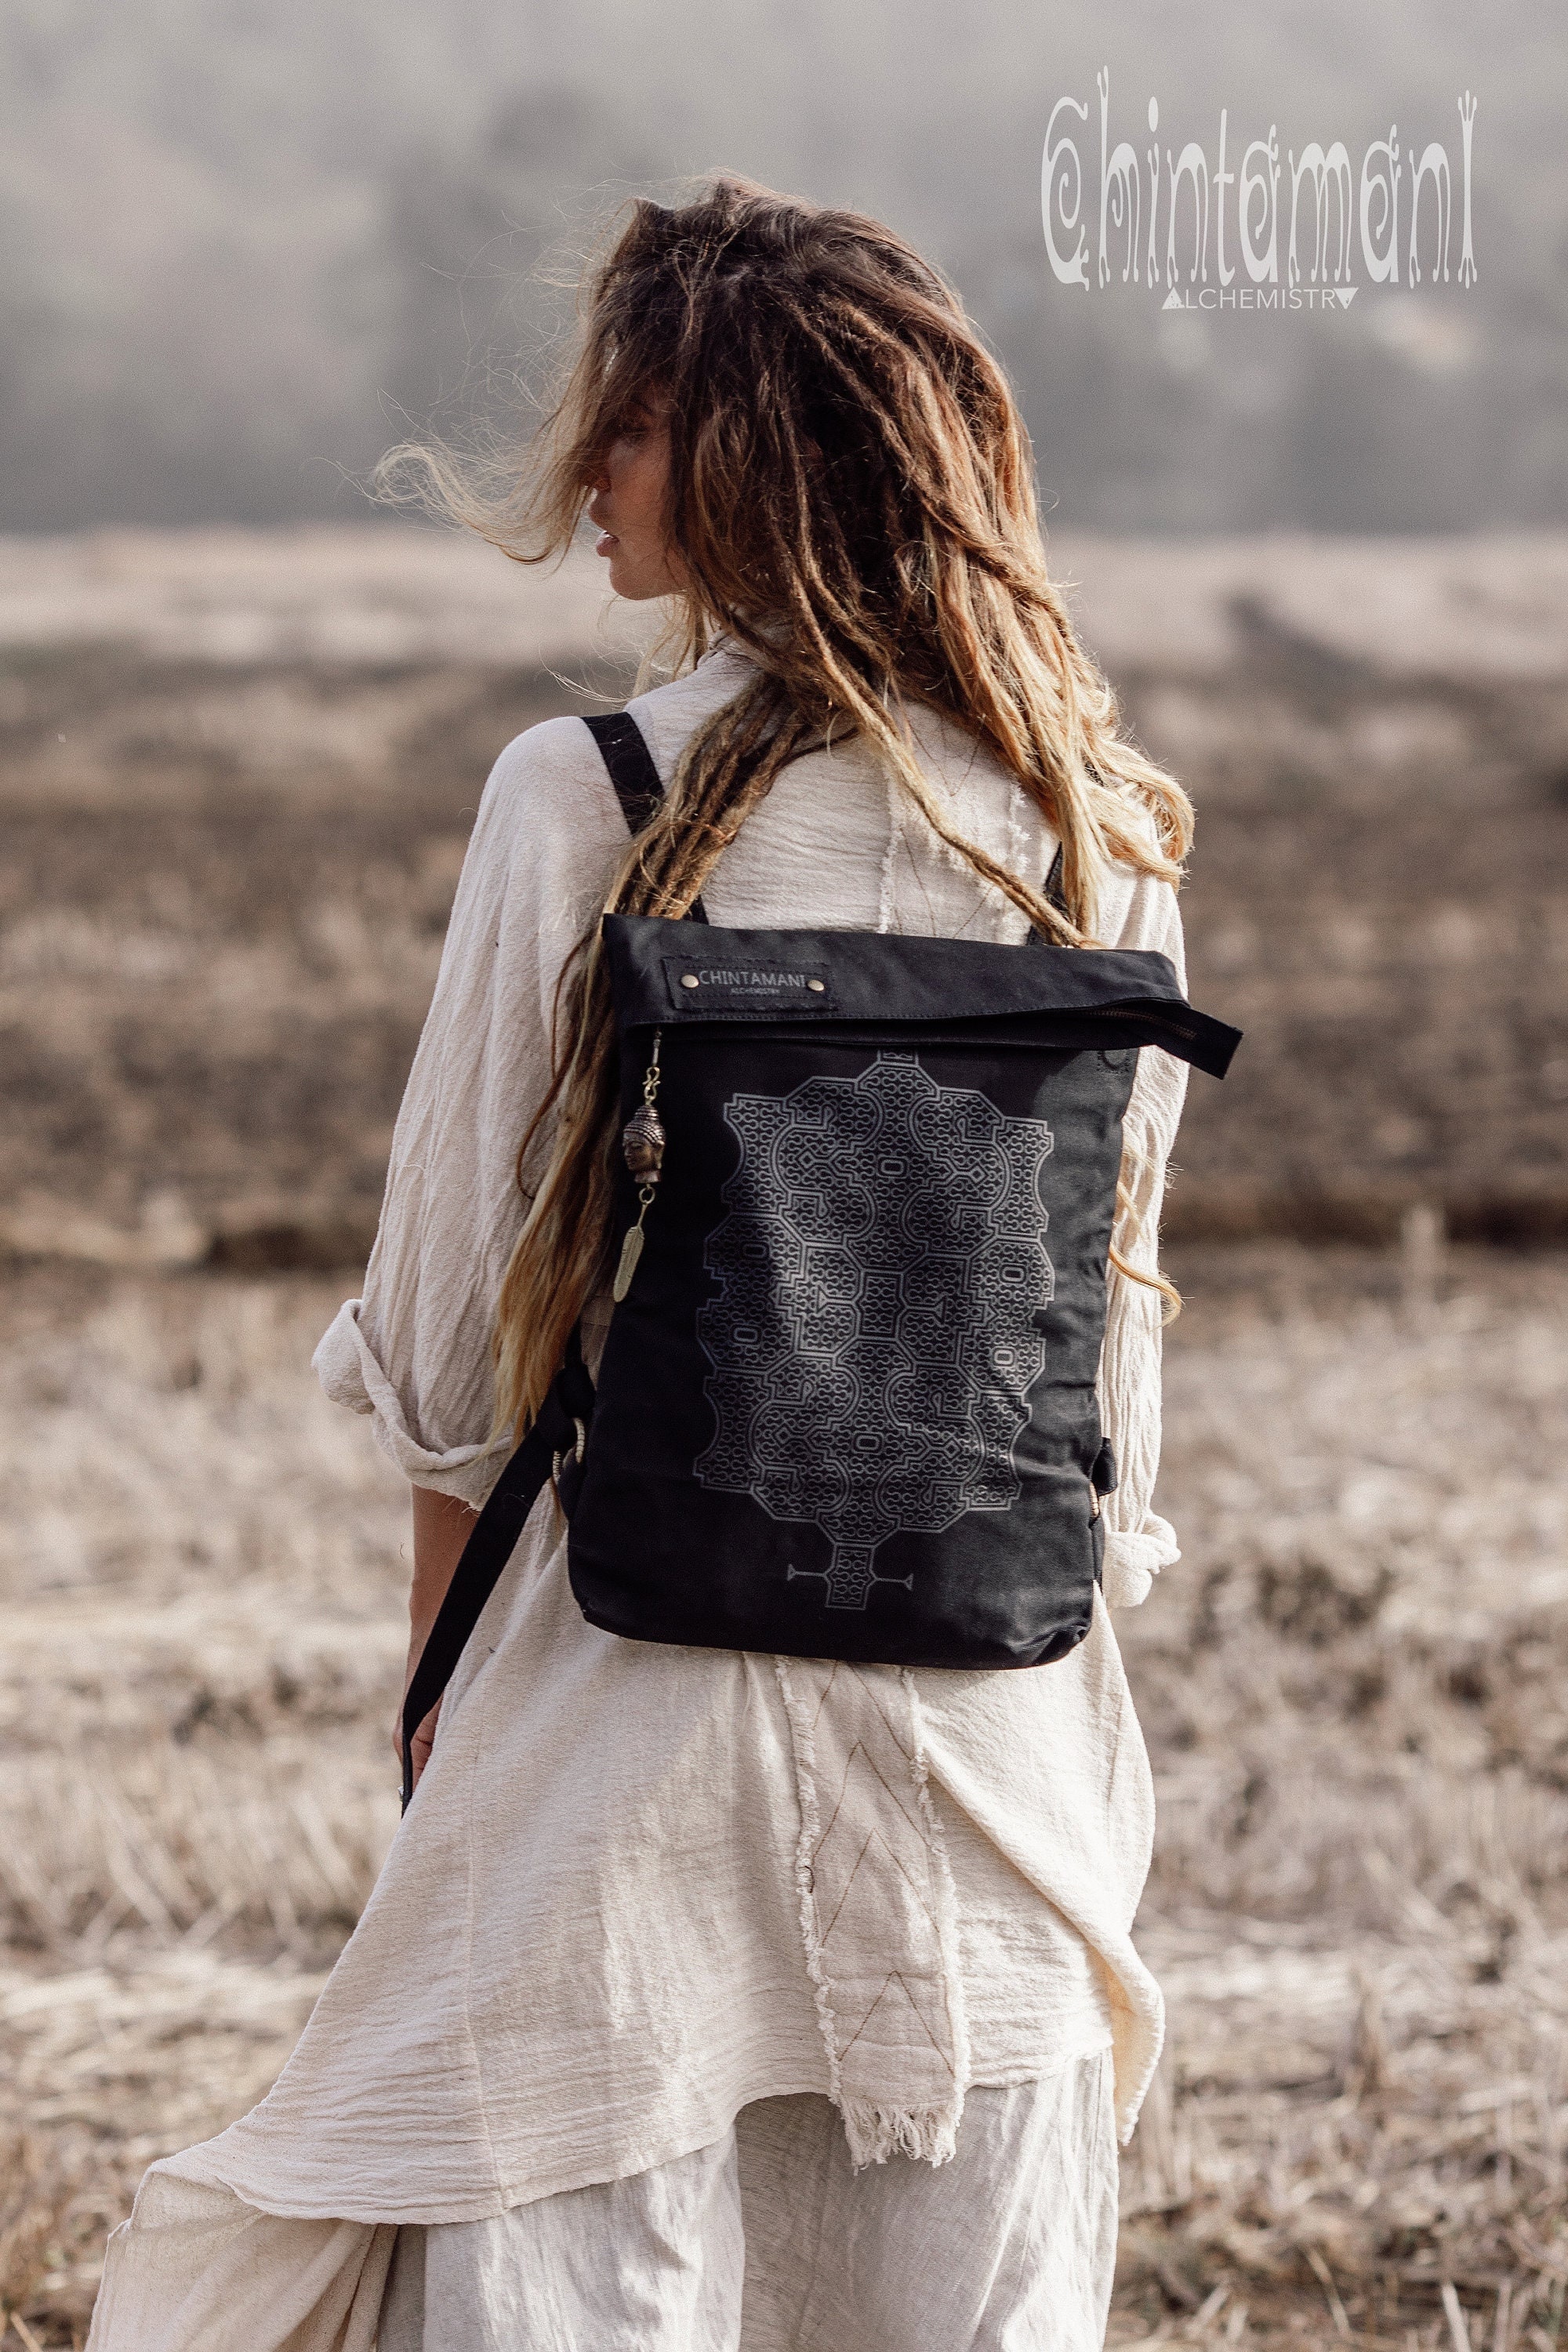 Bohemian Extra Large Canvas Backpack